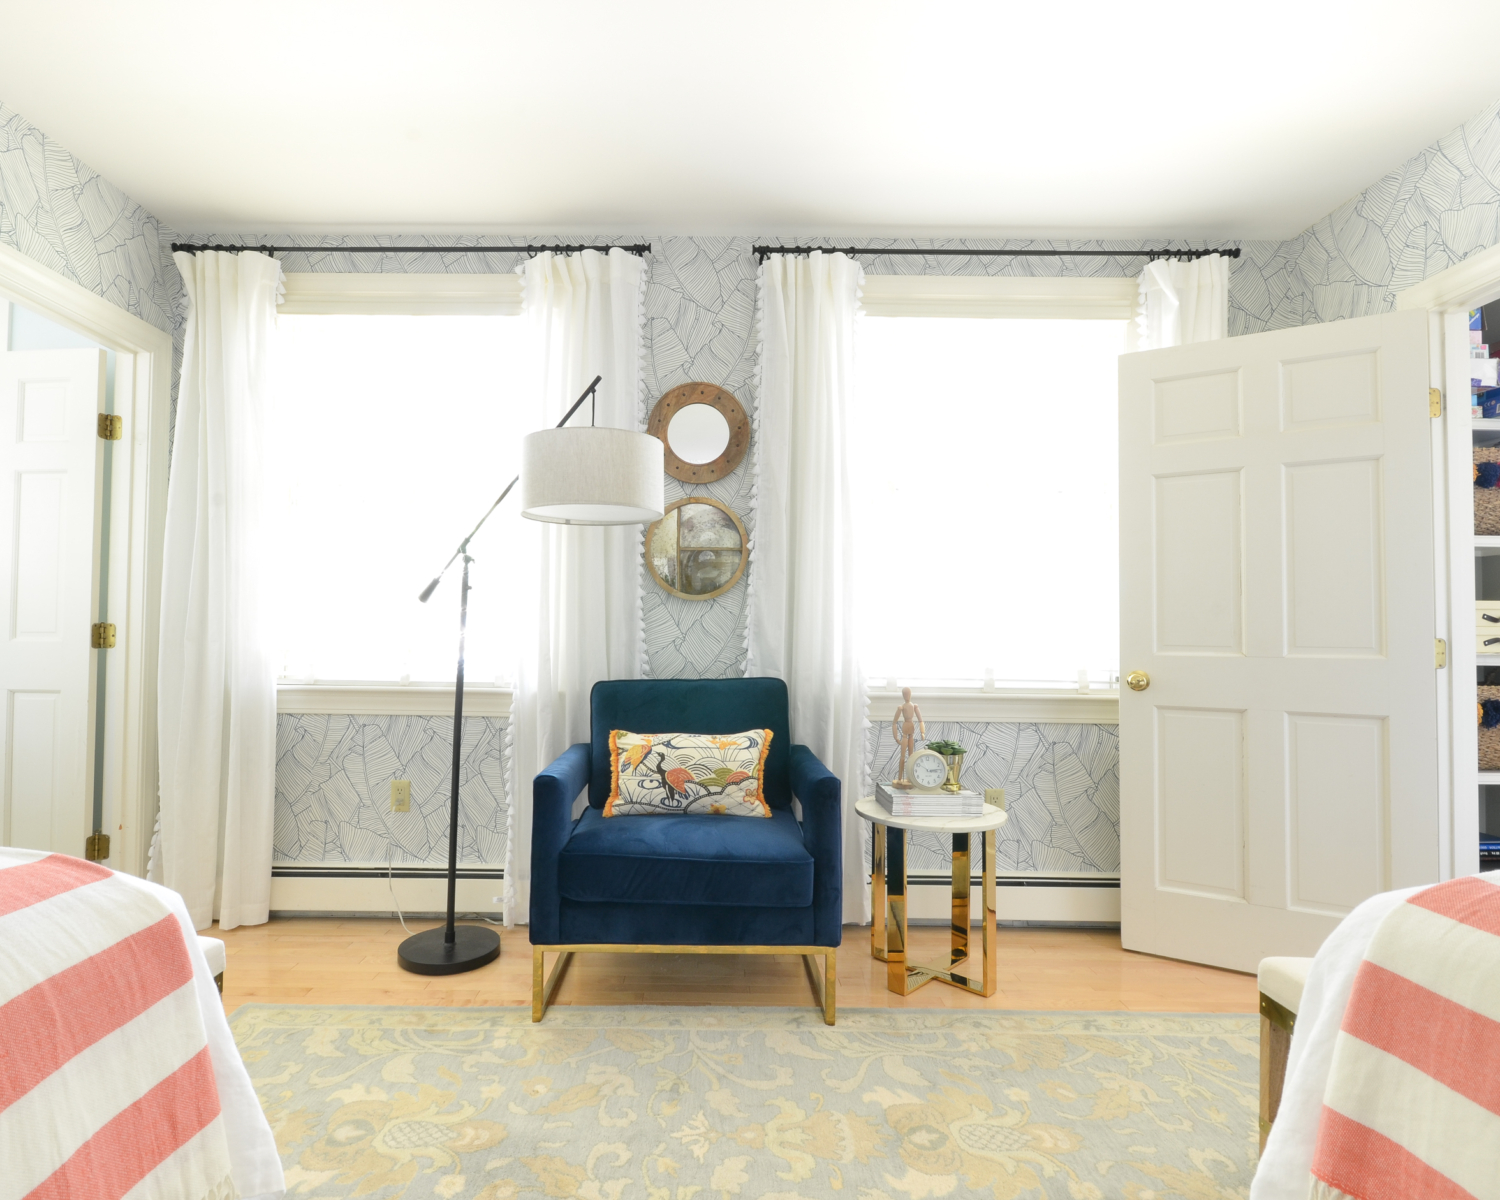 Wallpapered bedroom with twin beds, green upholstered headboards, navy blue, brass, and coral accents